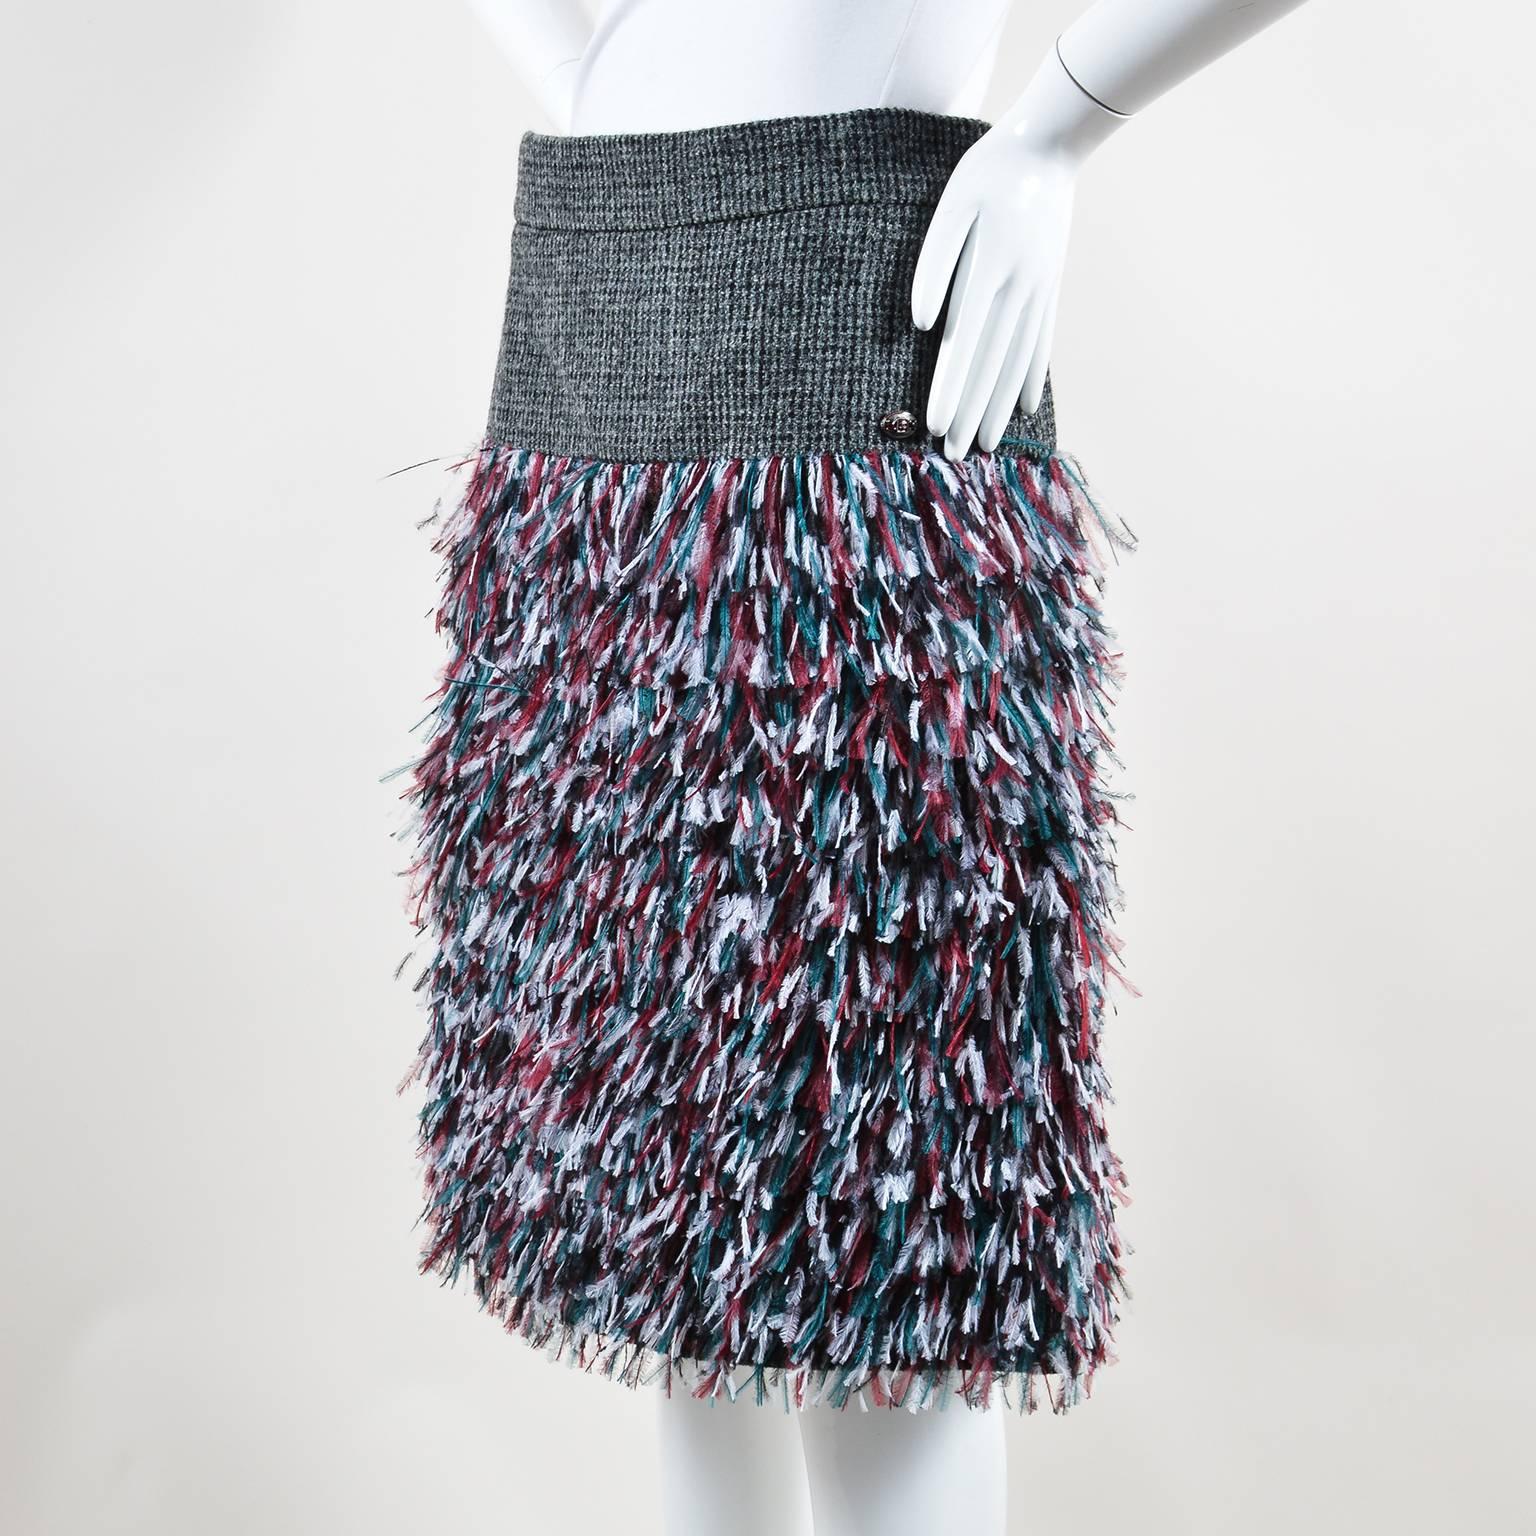 Retails at $7210. New with tags.
Gray and black tweed wool yoke. Maroon, forest green, white, and black ostrich feather fringe. Silver-tone metal and red enamel oval 'CC' plate at yoke. Concealed back zip and hook-and-eye closures. Lined.